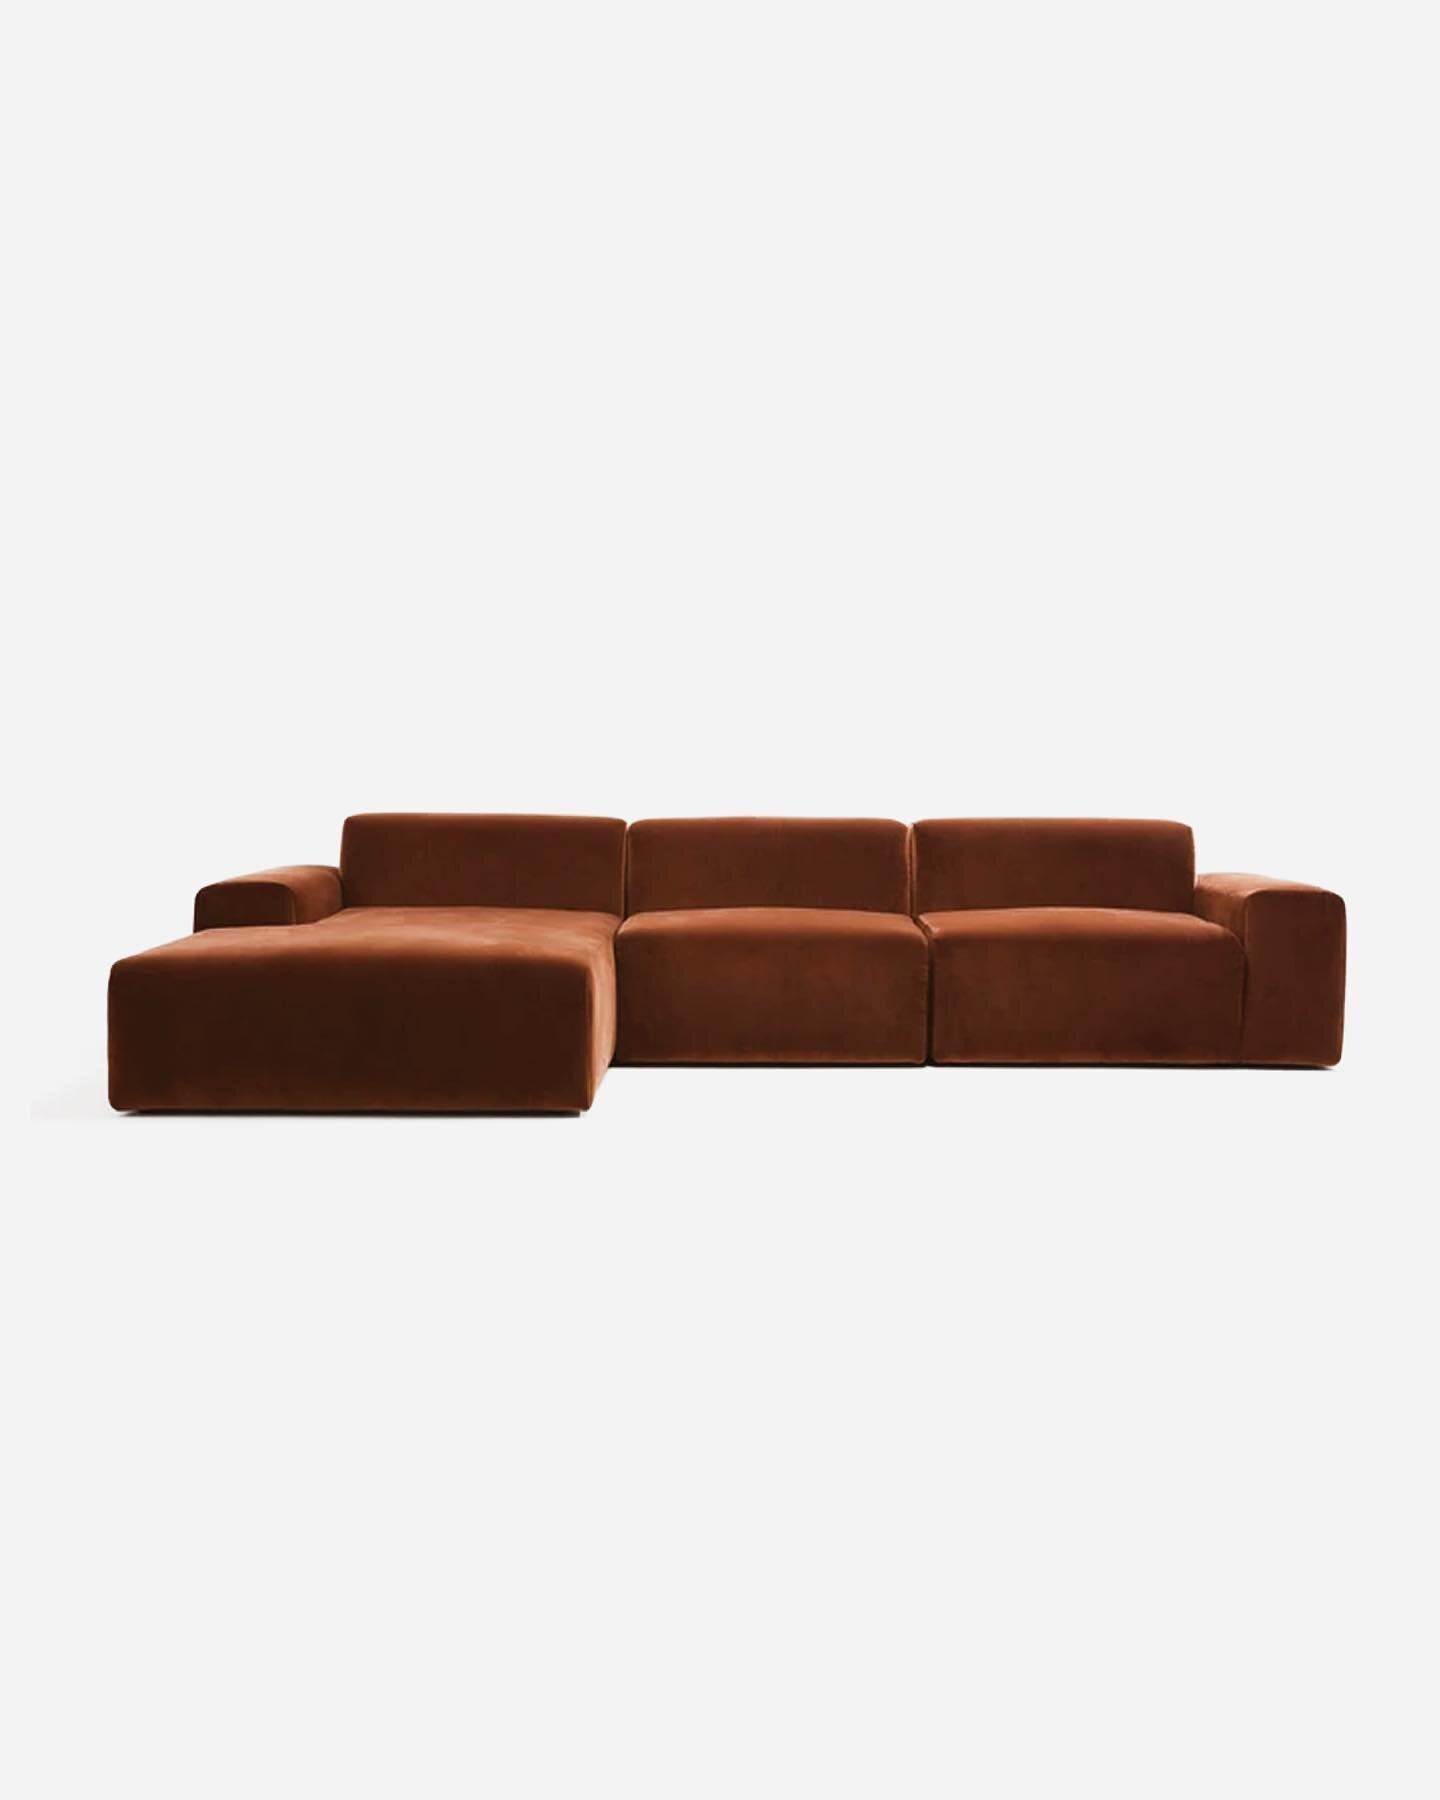 #thelocals 
The Portly sofa, is a unique made-to-order modular piece designed by Melbourne based furniture and homewares store, Southwood. With a wide range of upholstery options, the Portly sofa embraces Southwood&rsquo;s relaxed and contemporary Au